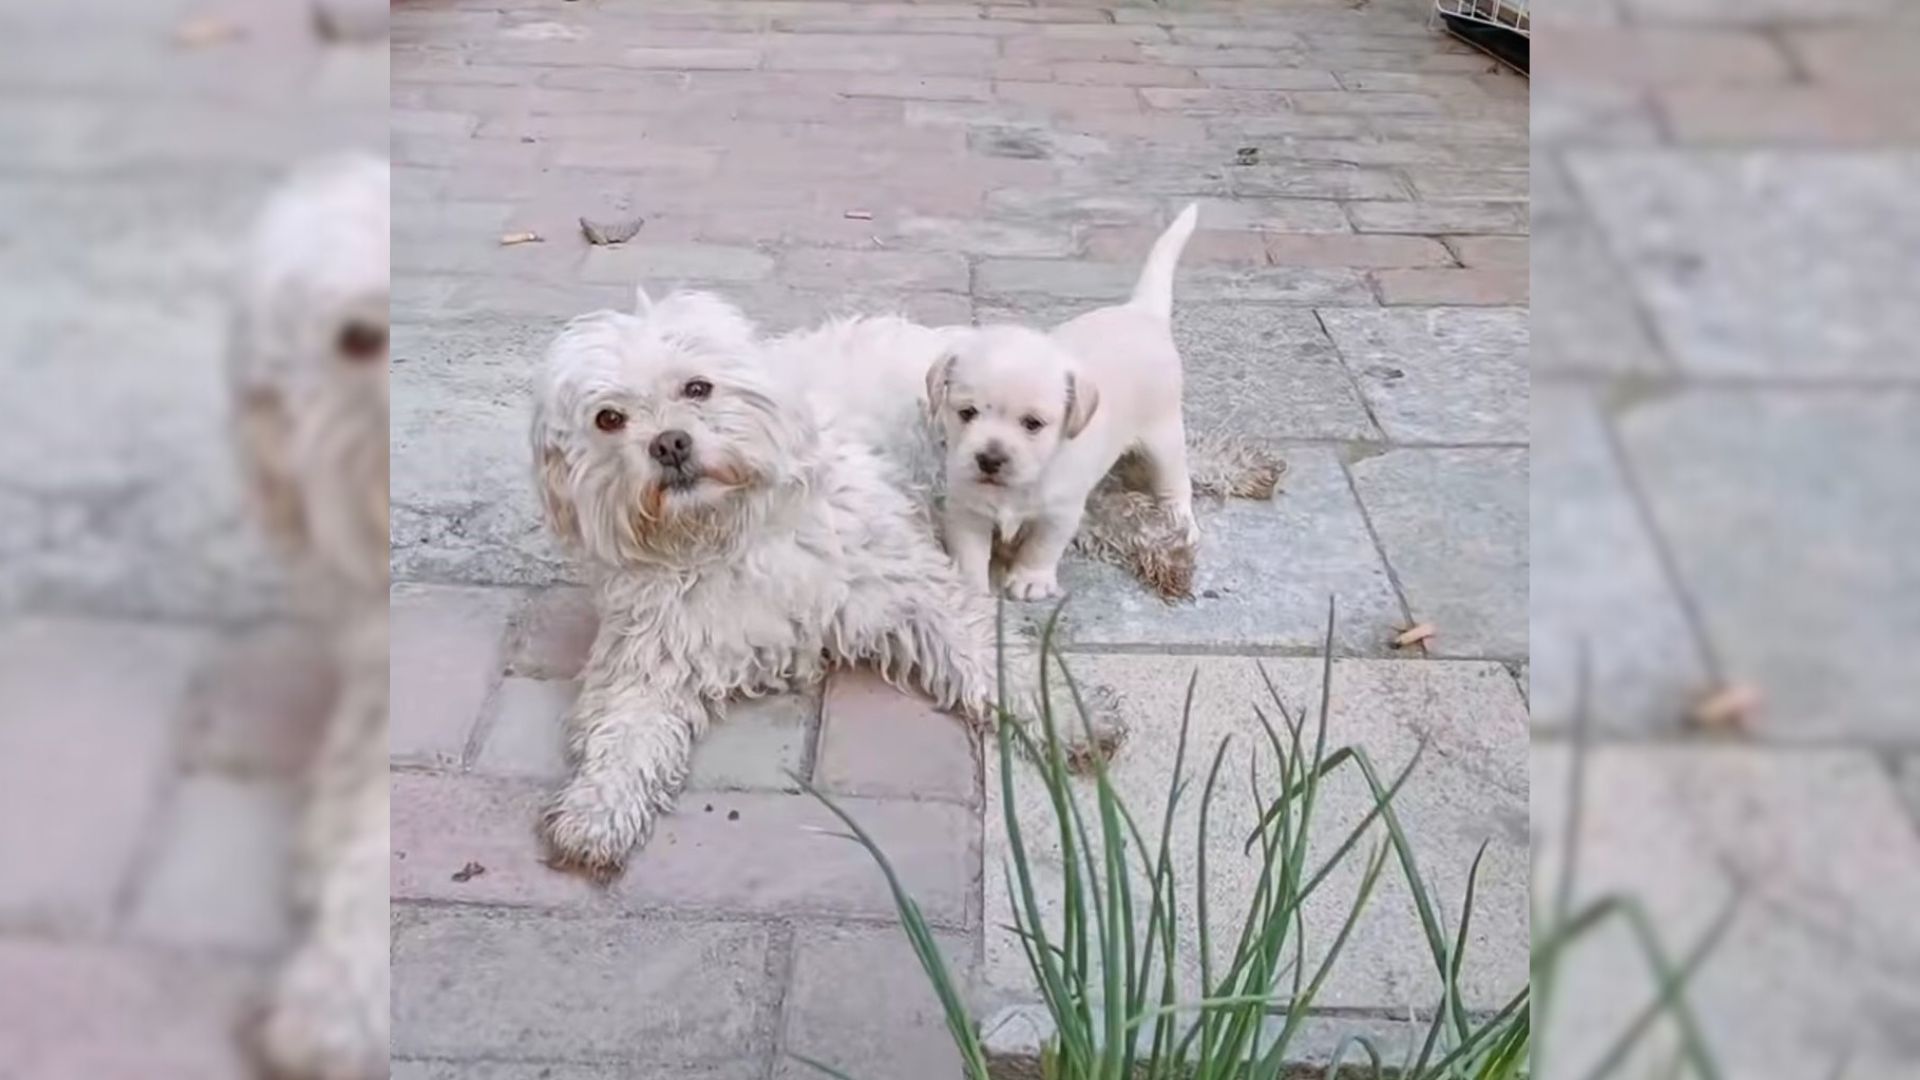 Family Feeds The Stray Dog That Appears On Their Doorstep, Only To Learn Her Giant Secret